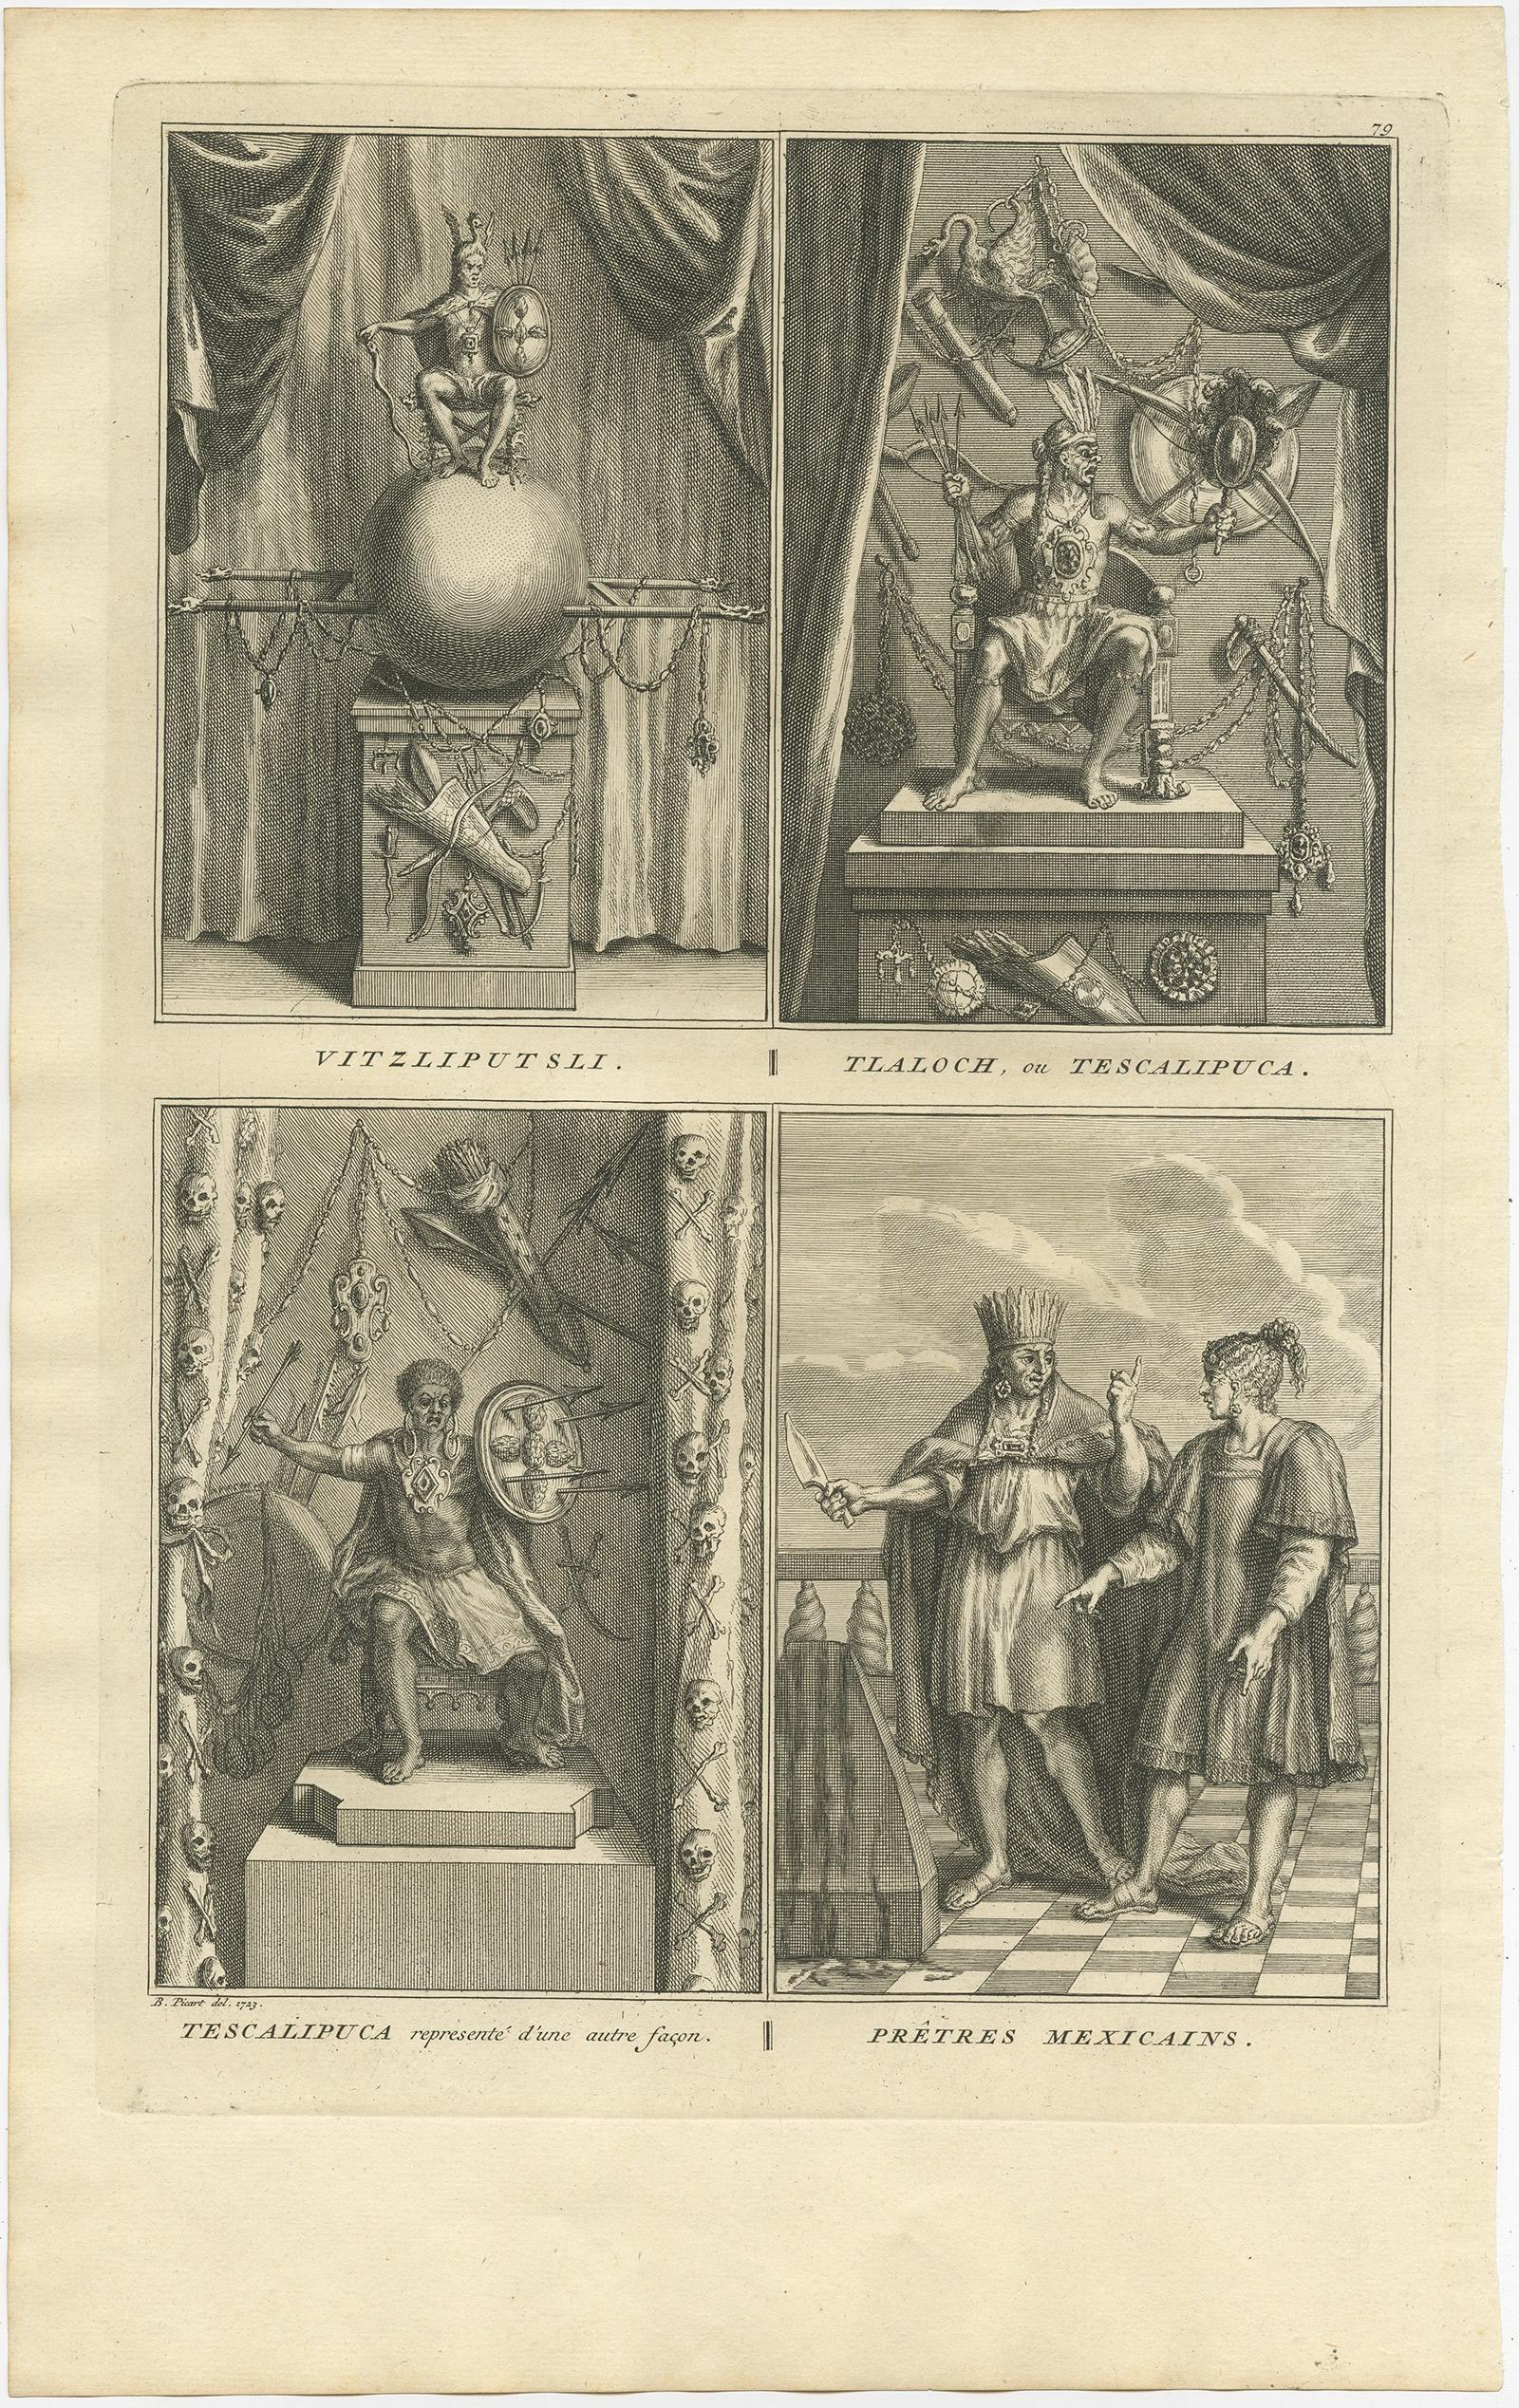 Antique print titled 'Vitzliputsli (..)'. Old print of the Aztec deities Vitzliputsli, Tlaloch or Tescalipuca. Also depicted are Mexican priests. Originates from 'Ceremonies et coutumes Religieuses...' , by A. Moubach.

Artists and Engravers: